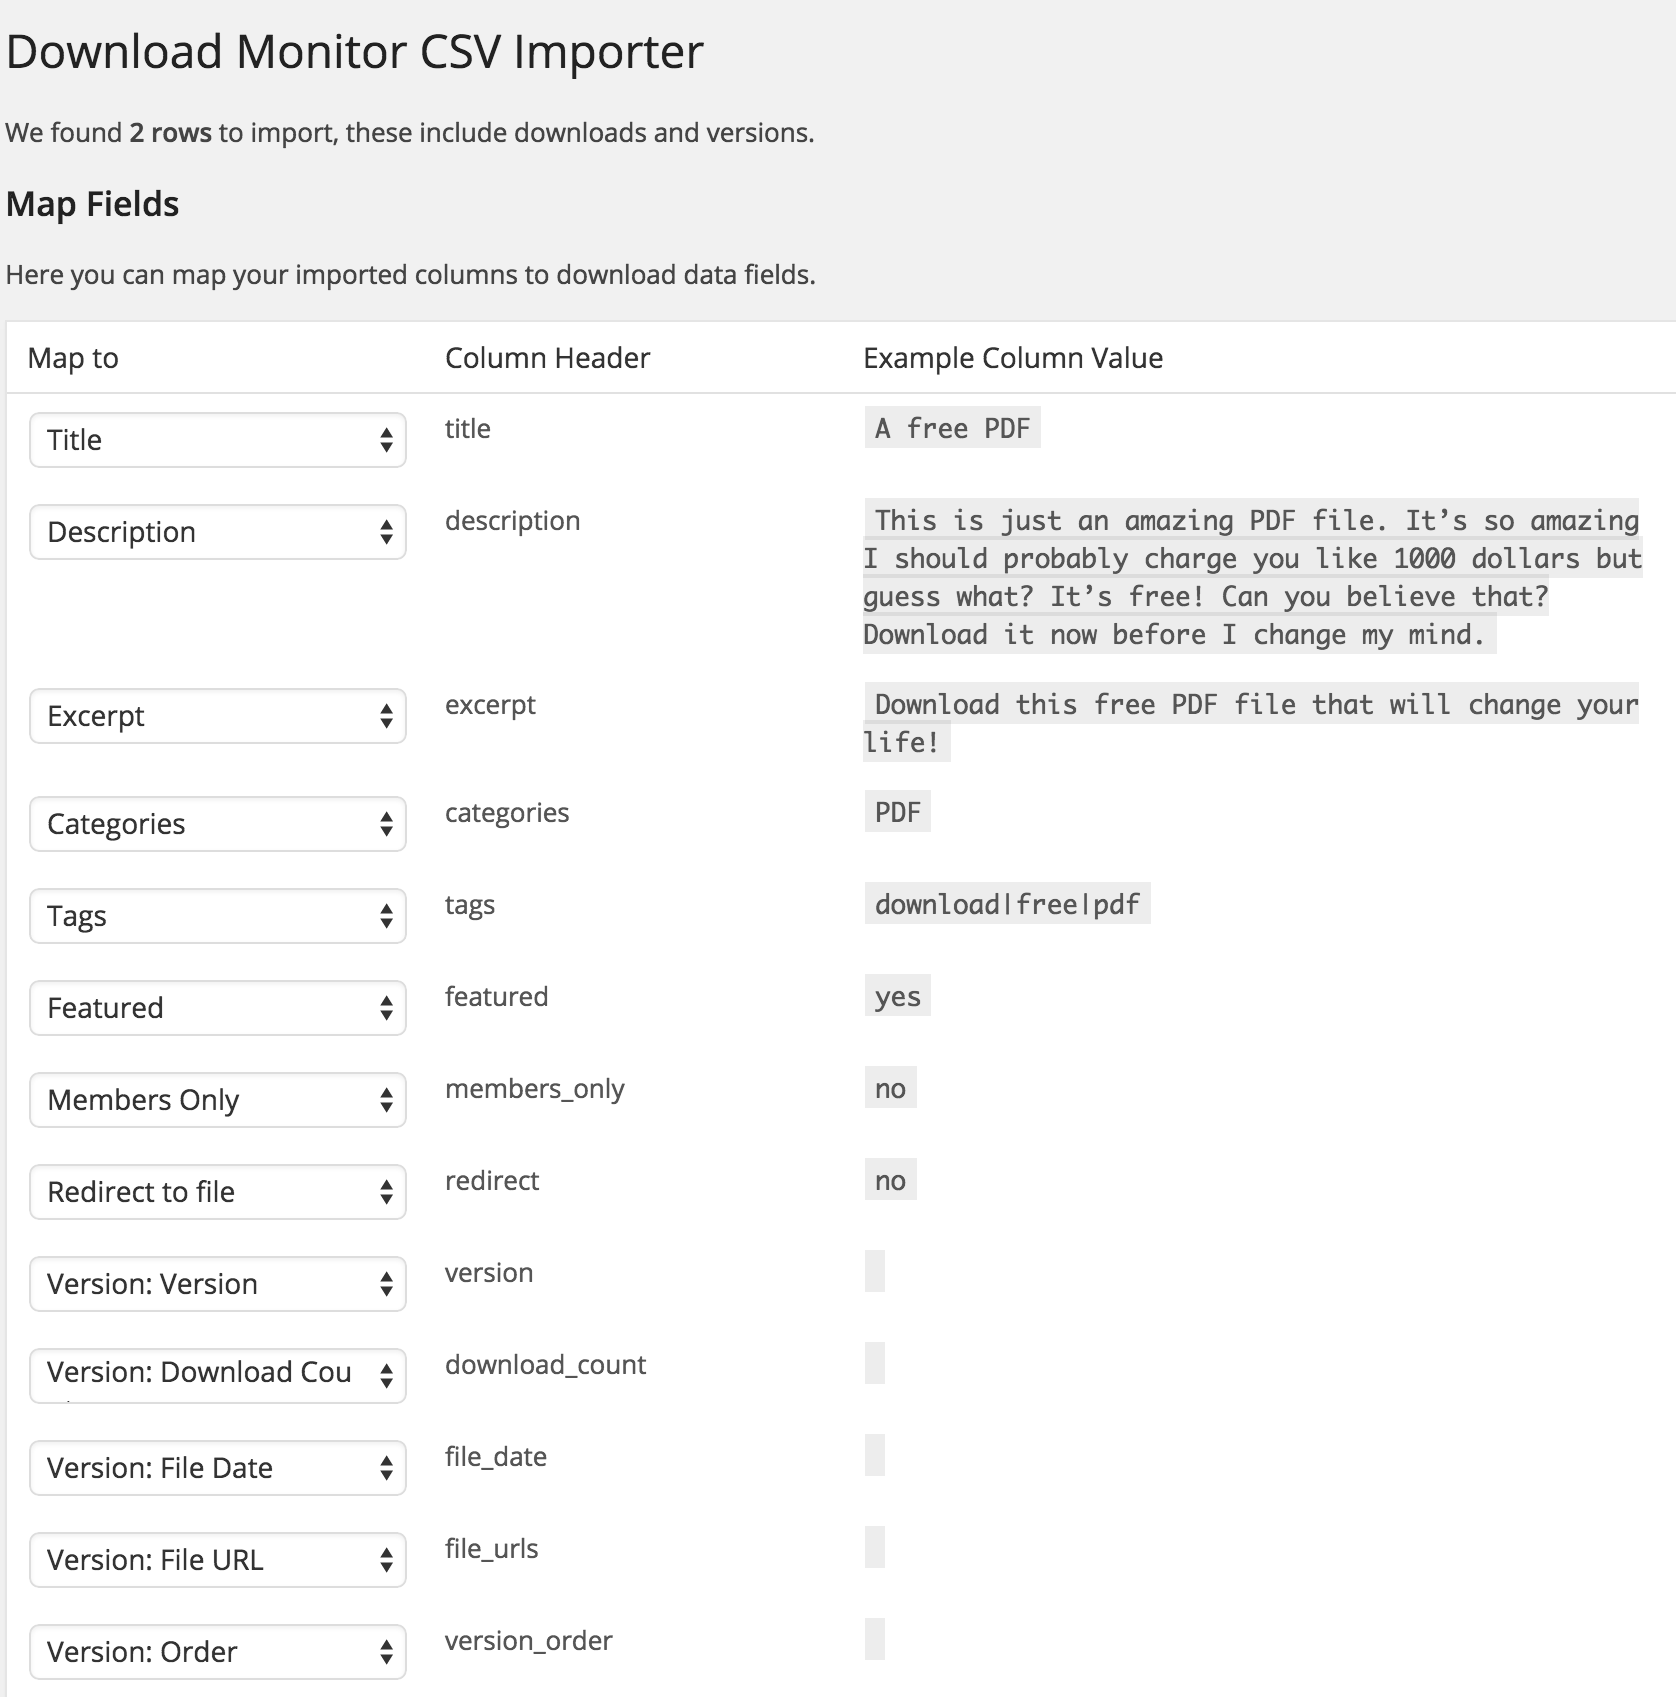 Map the CSV columns to the correct Download fields